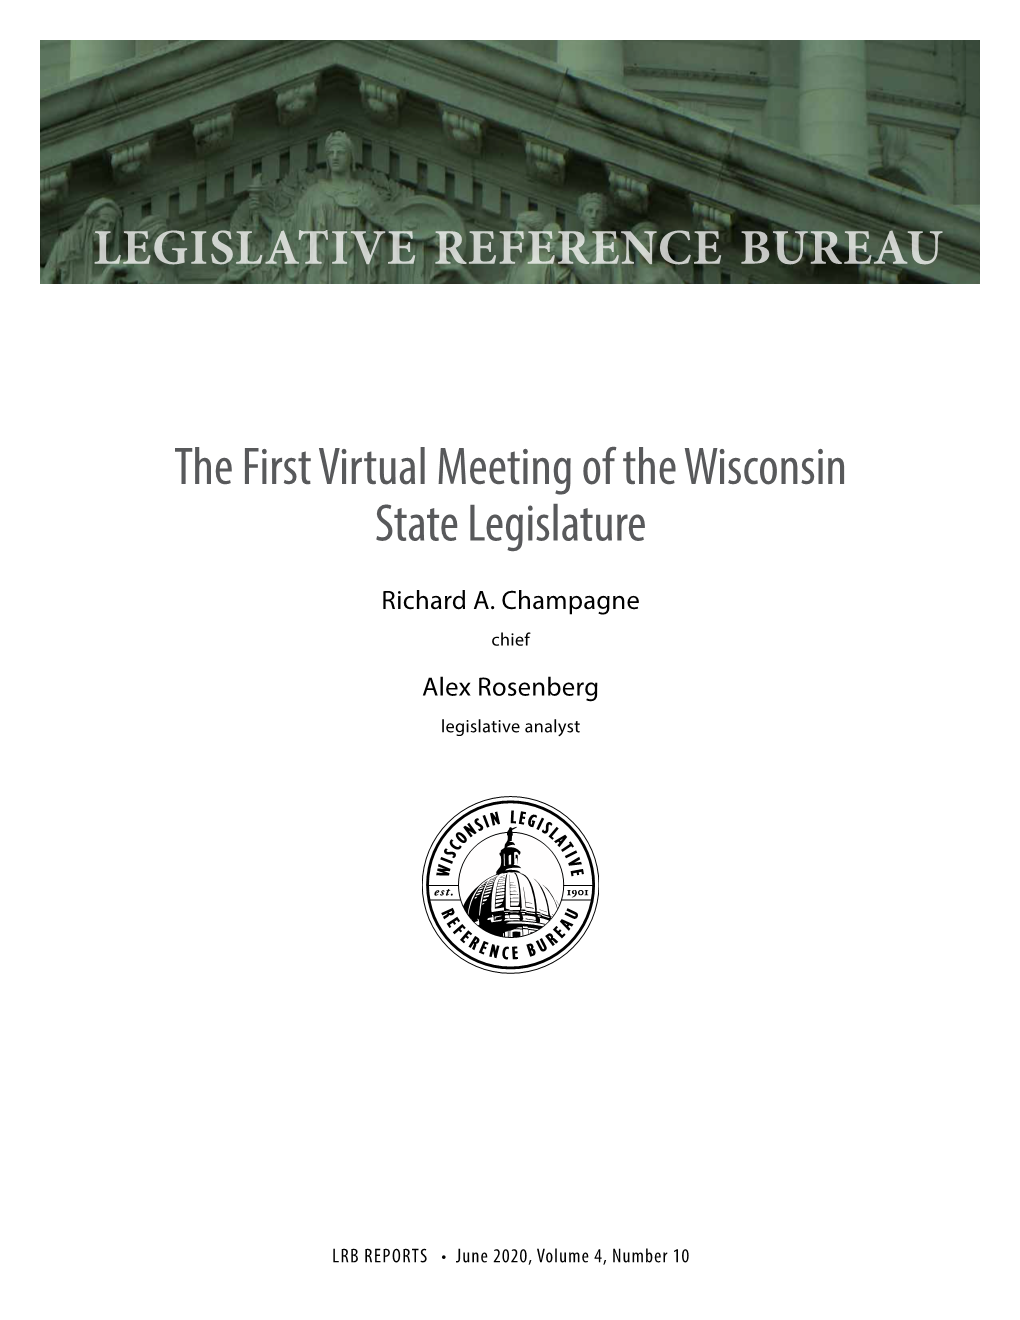 The First Virtual Meeting of the Wisconsin State Legislature